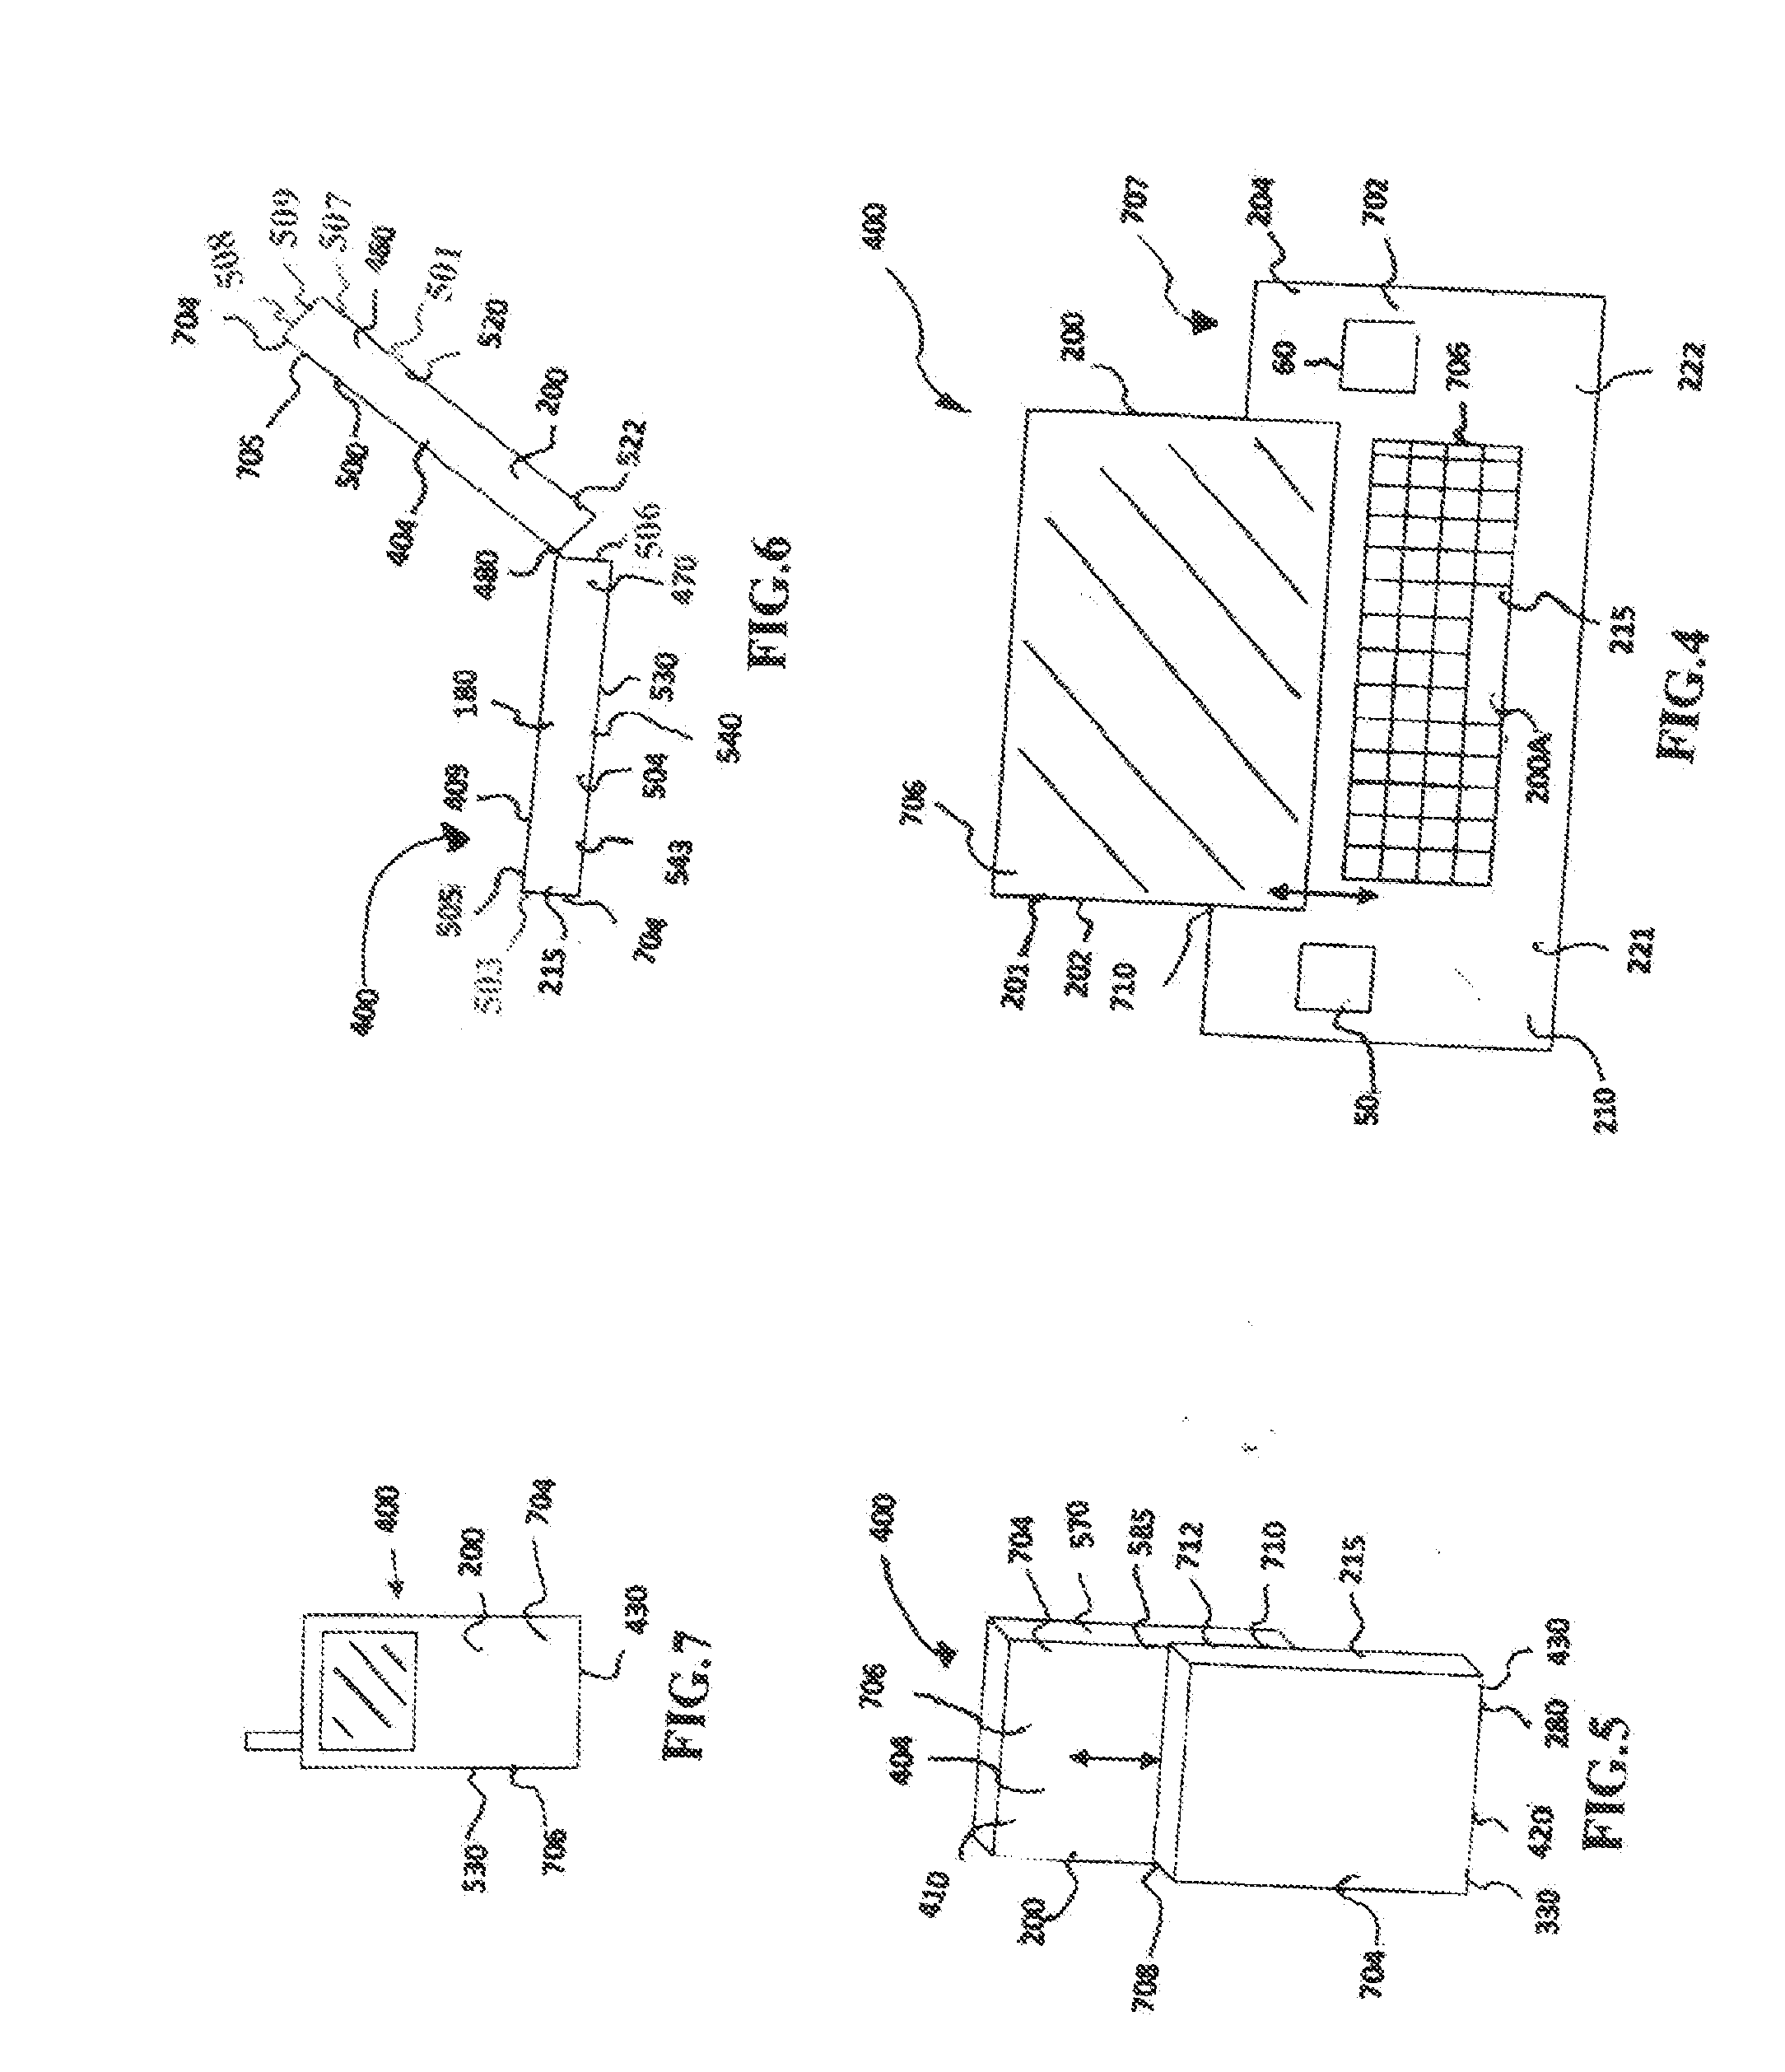 Energy harvesting computer device in association with a communication device configured with apparatus for boosting signal reception